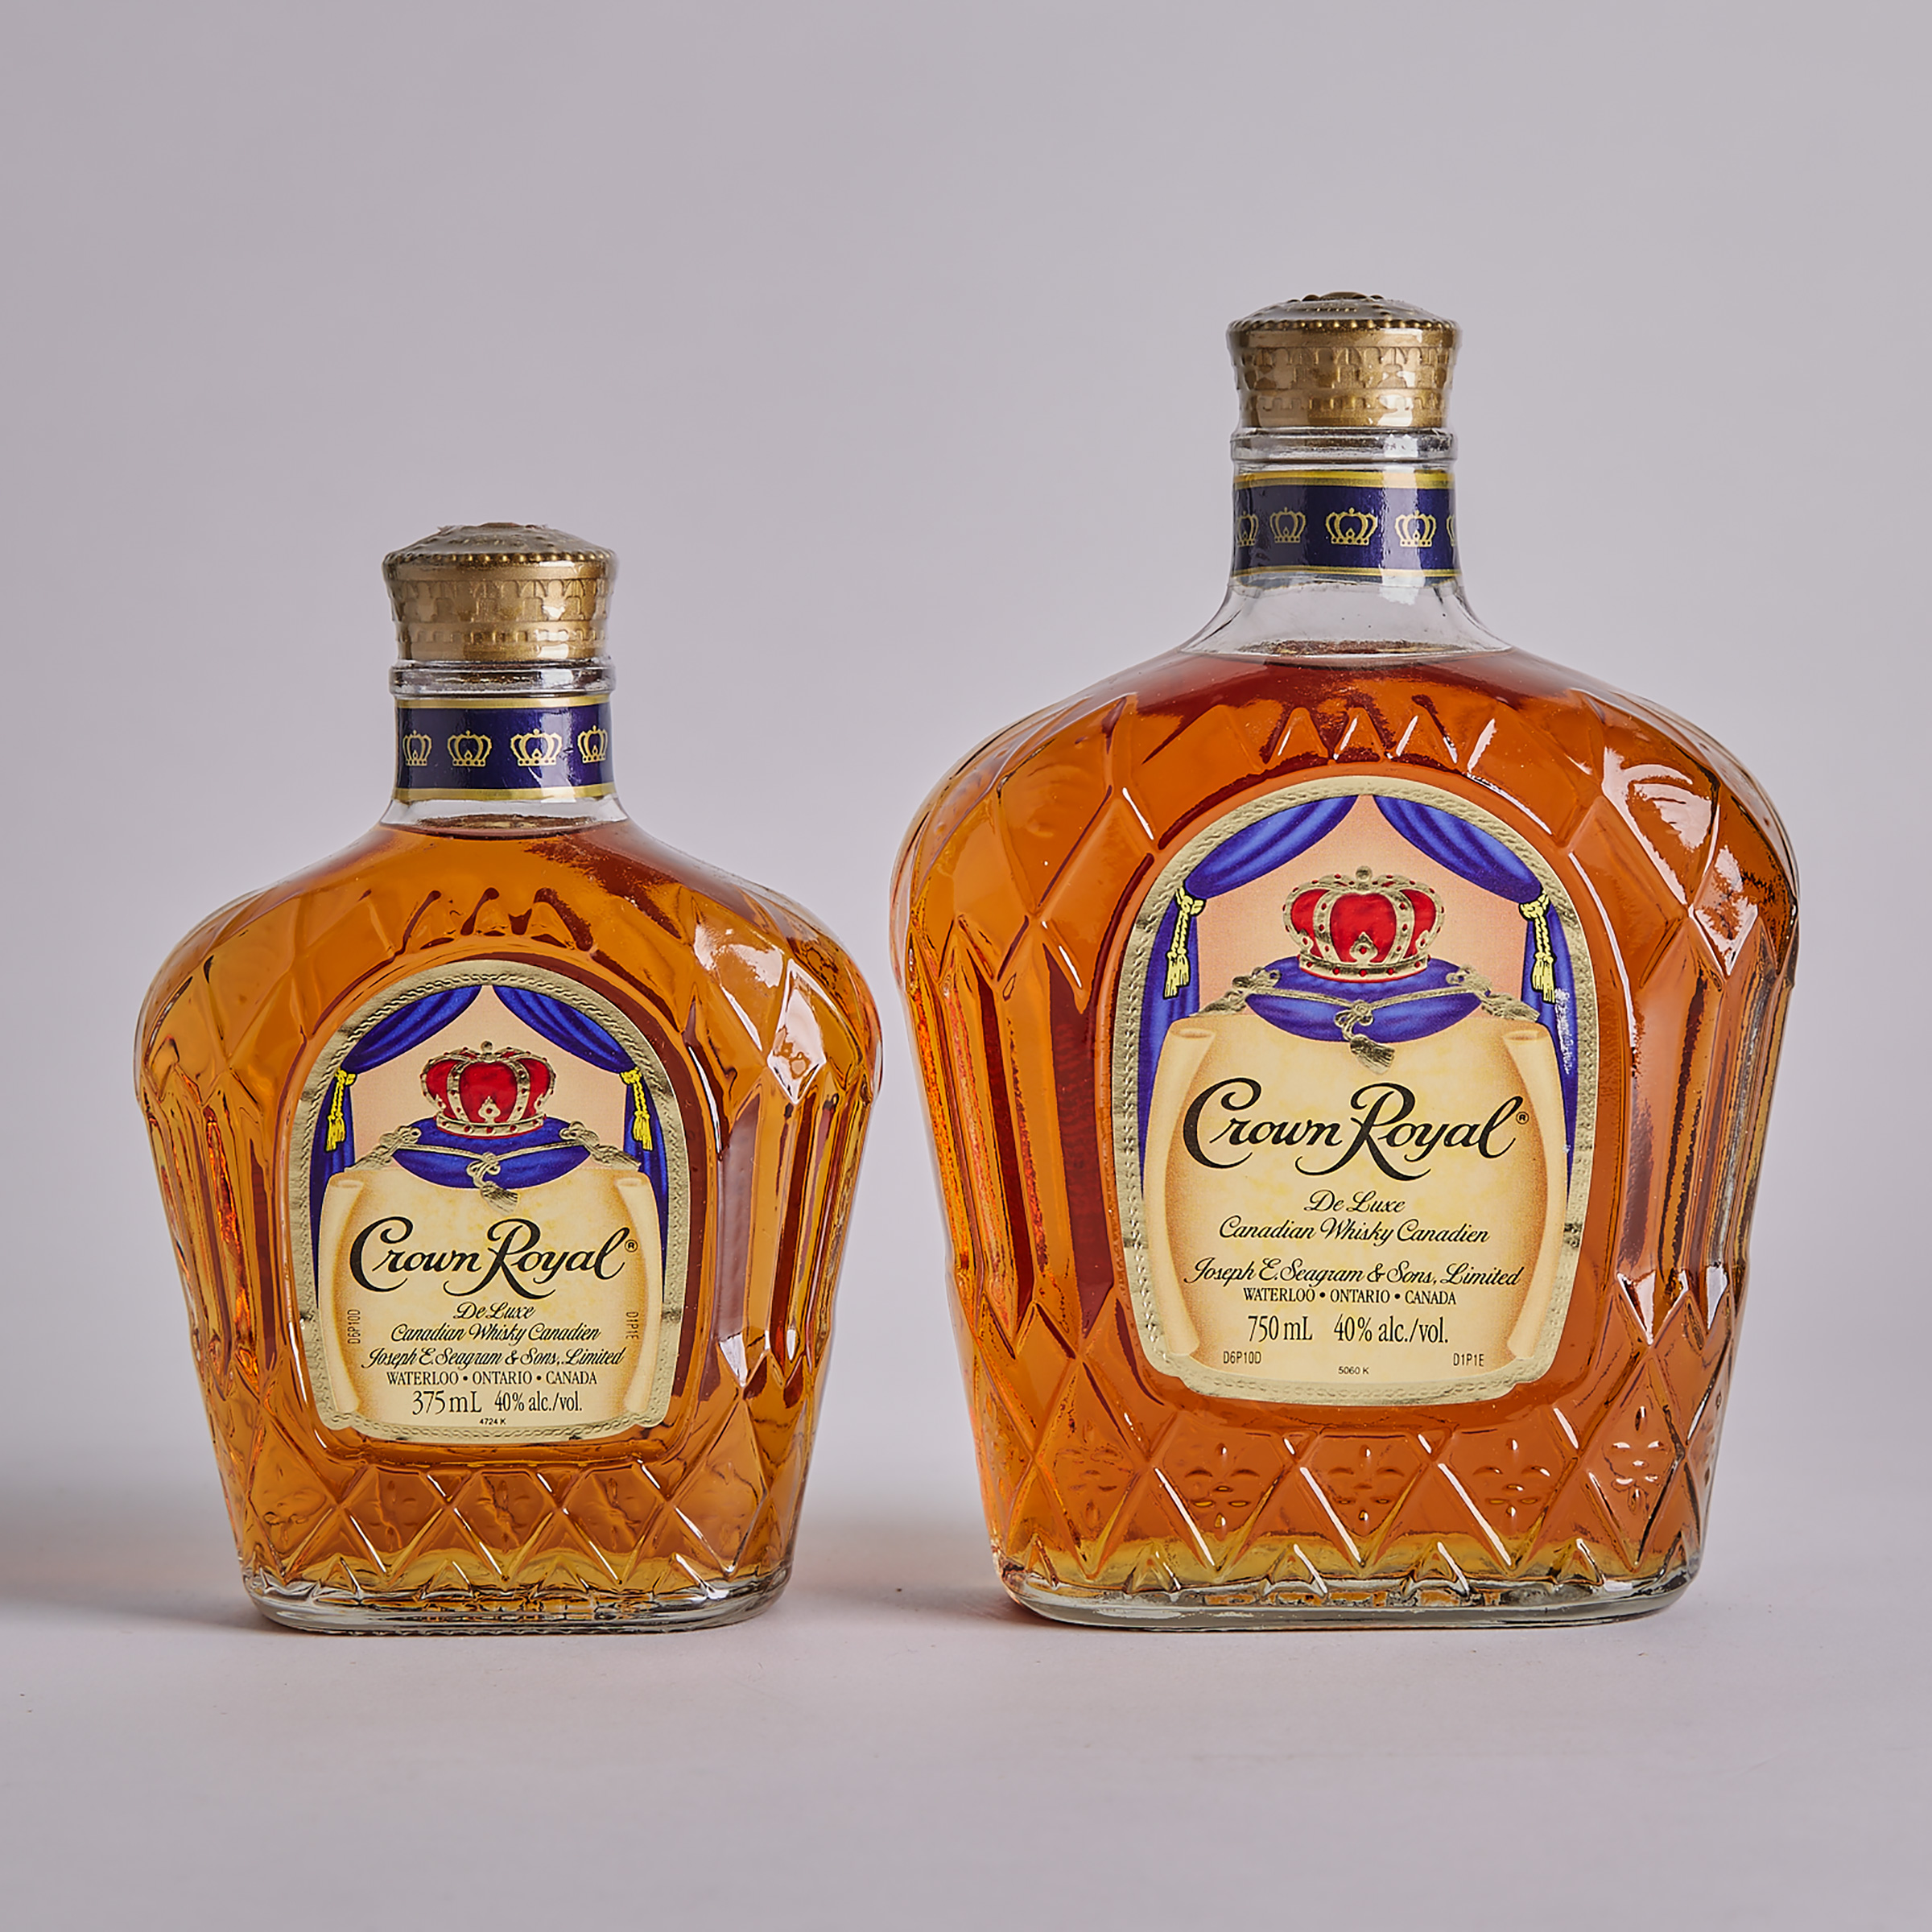 CROWN ROYAL DELUXE CANADIAN WHISKY (ONE 375 ML)
CROWN ROYAL DELUXE CANADIAN WHISKY (ONE 750 ML)